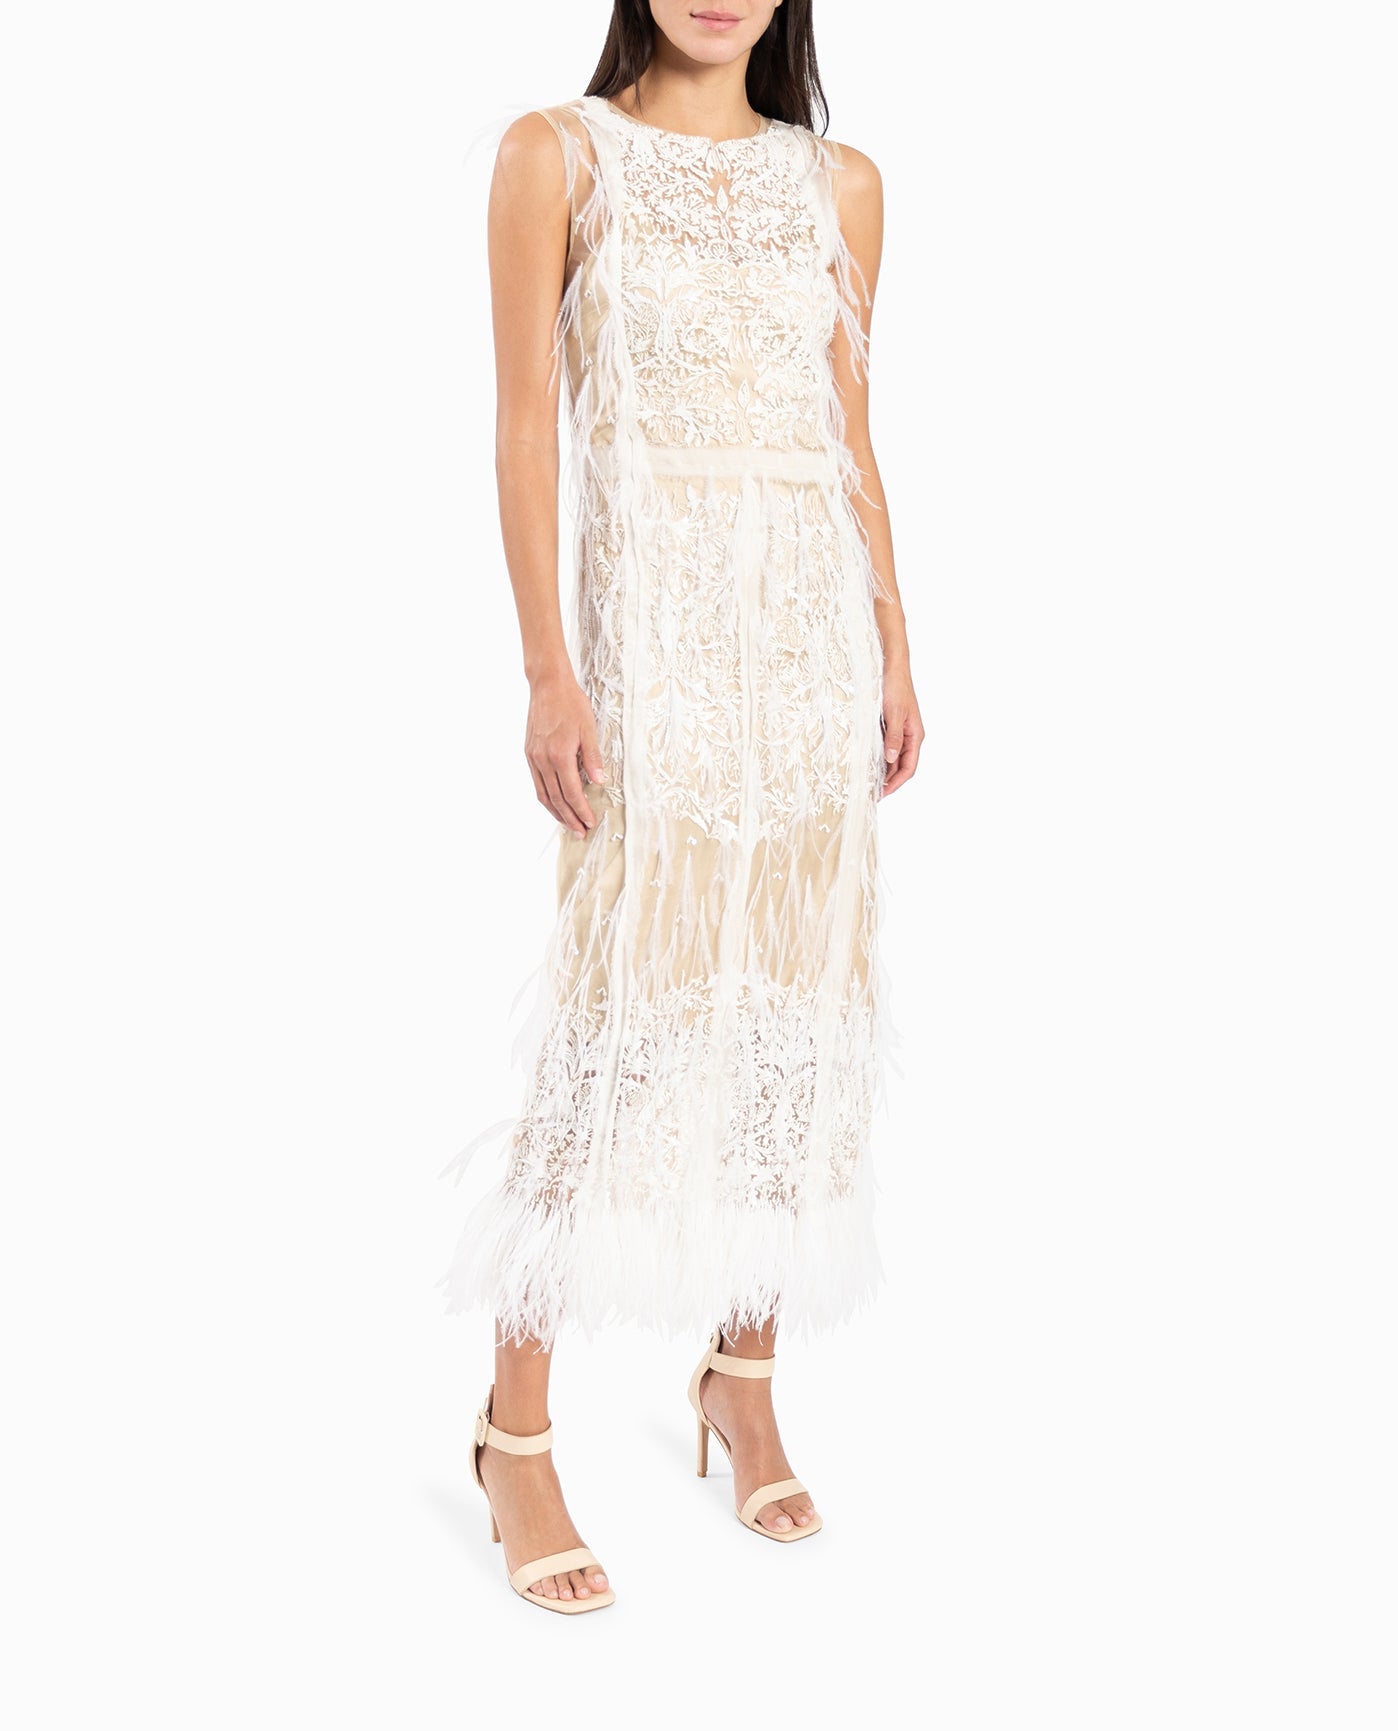 SIDE OF FLOUNCY FEATHER MIDI DRESS | White